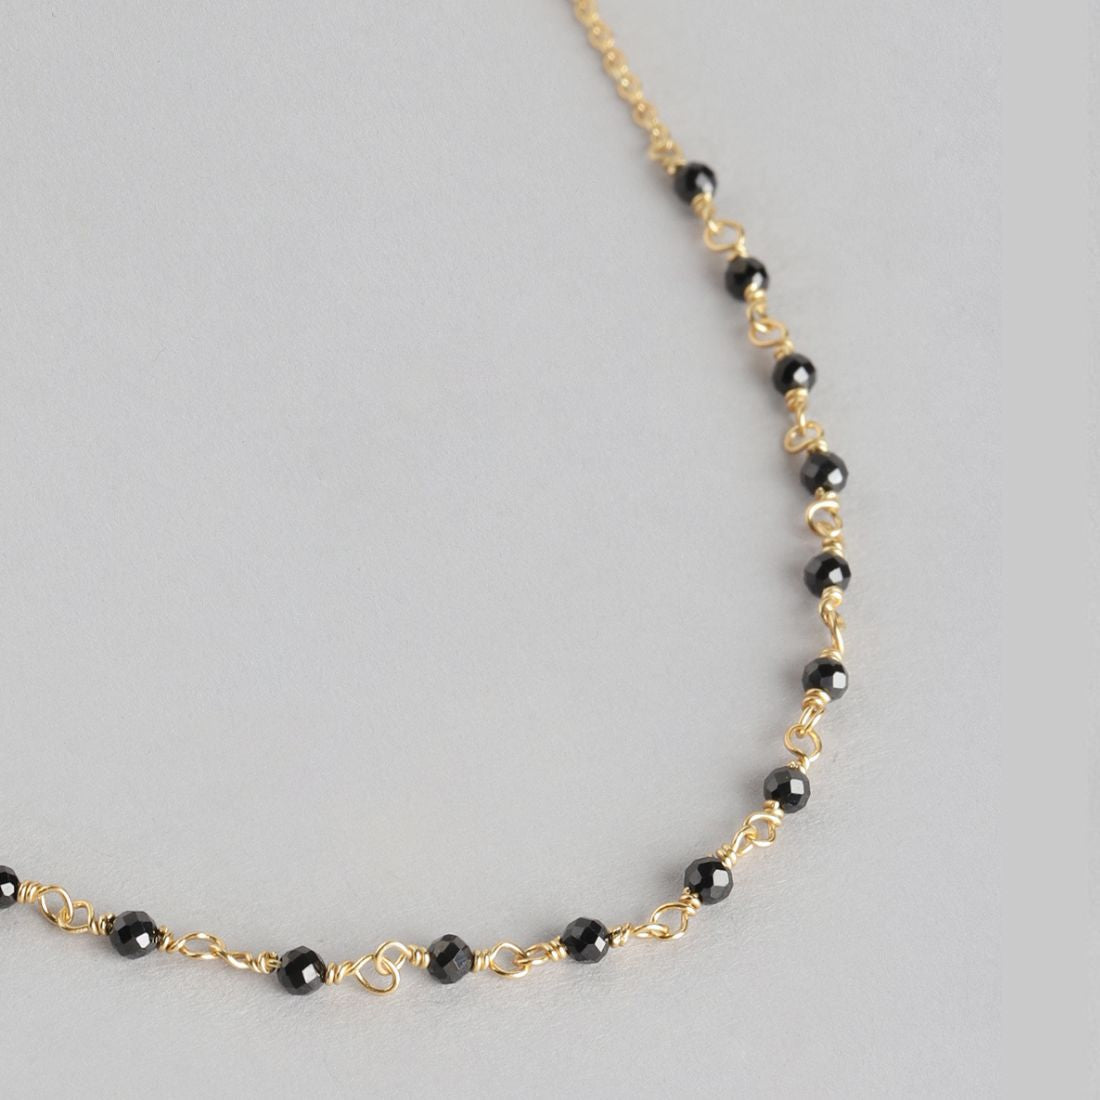 Golden Rhapsody 925 Sterling Silver Gold-Plated Beaded Mangalsutra